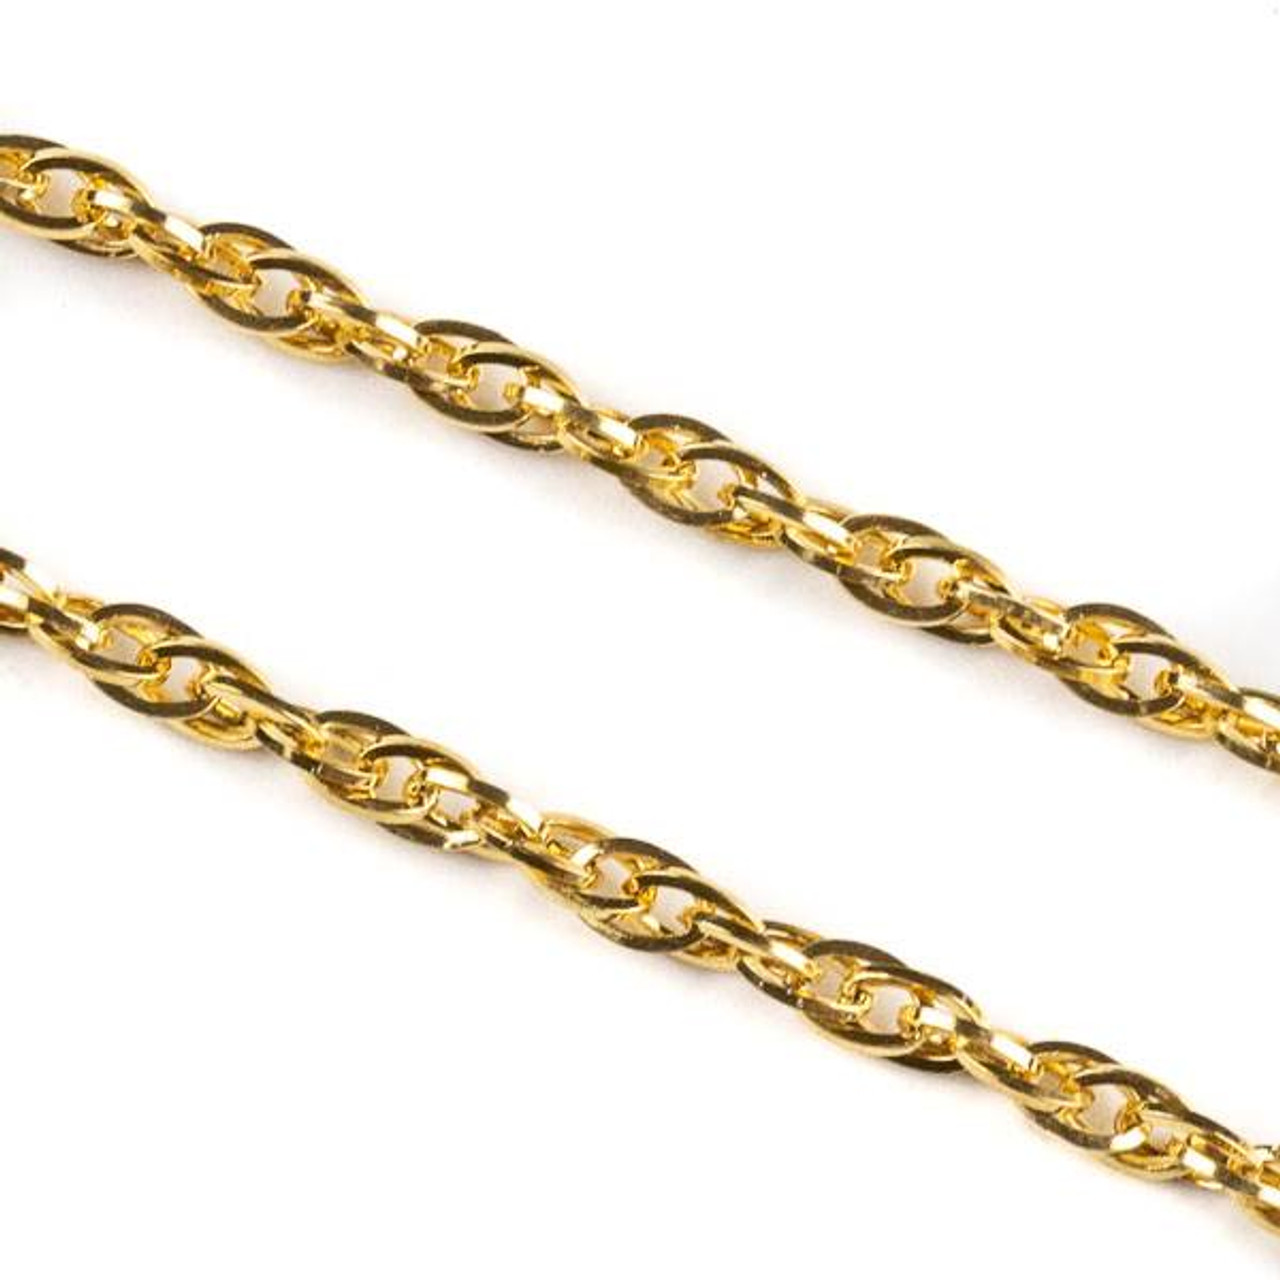 18k Gold Plated Stainless Steel 3mm Rope Chain - 10 meter spool SS08g-sp